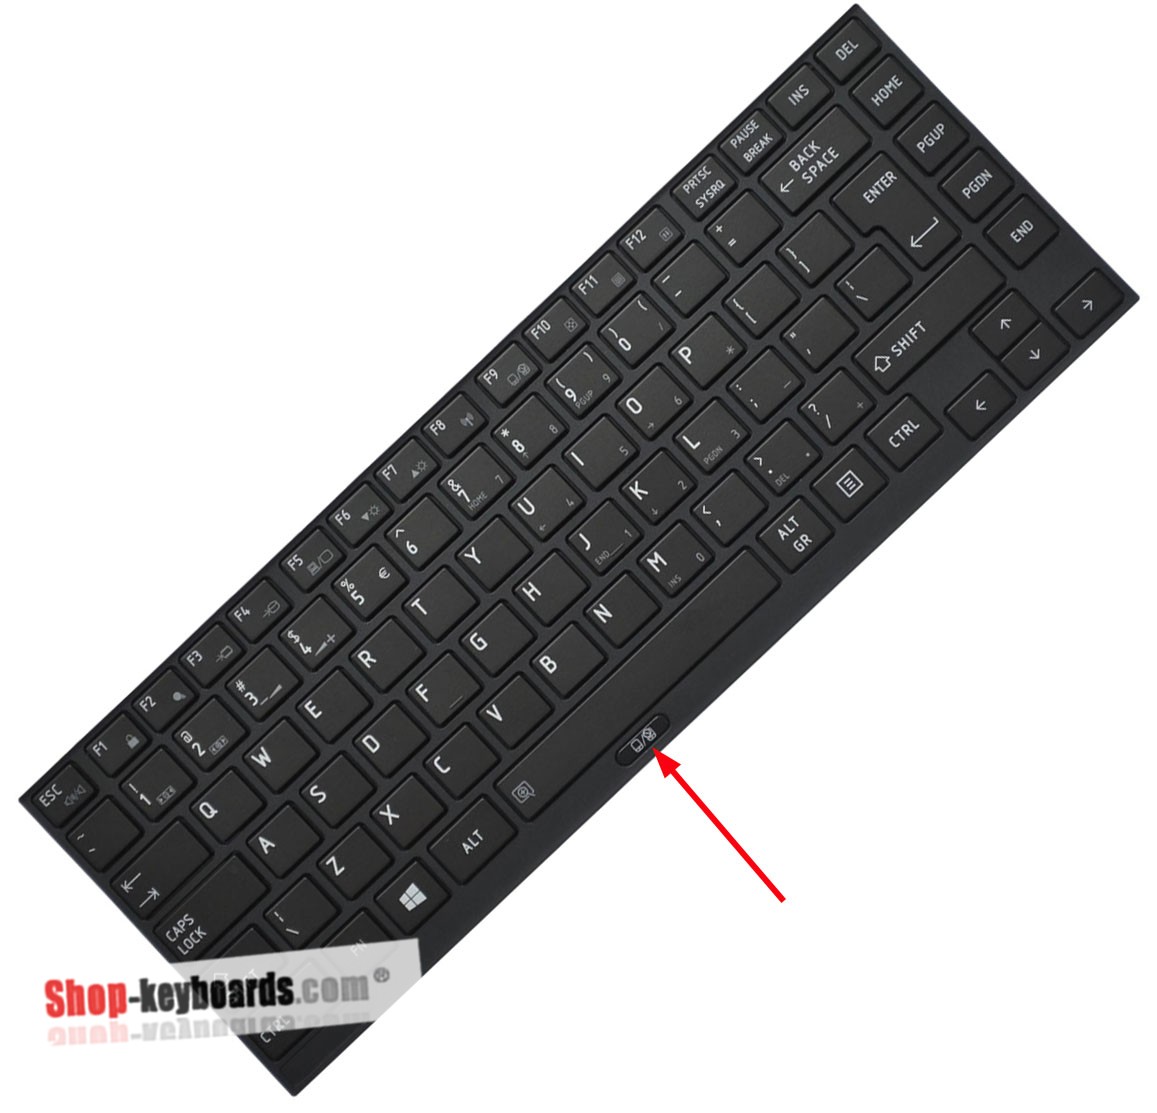 Toshiba Portege R700-1DH  Keyboard replacement